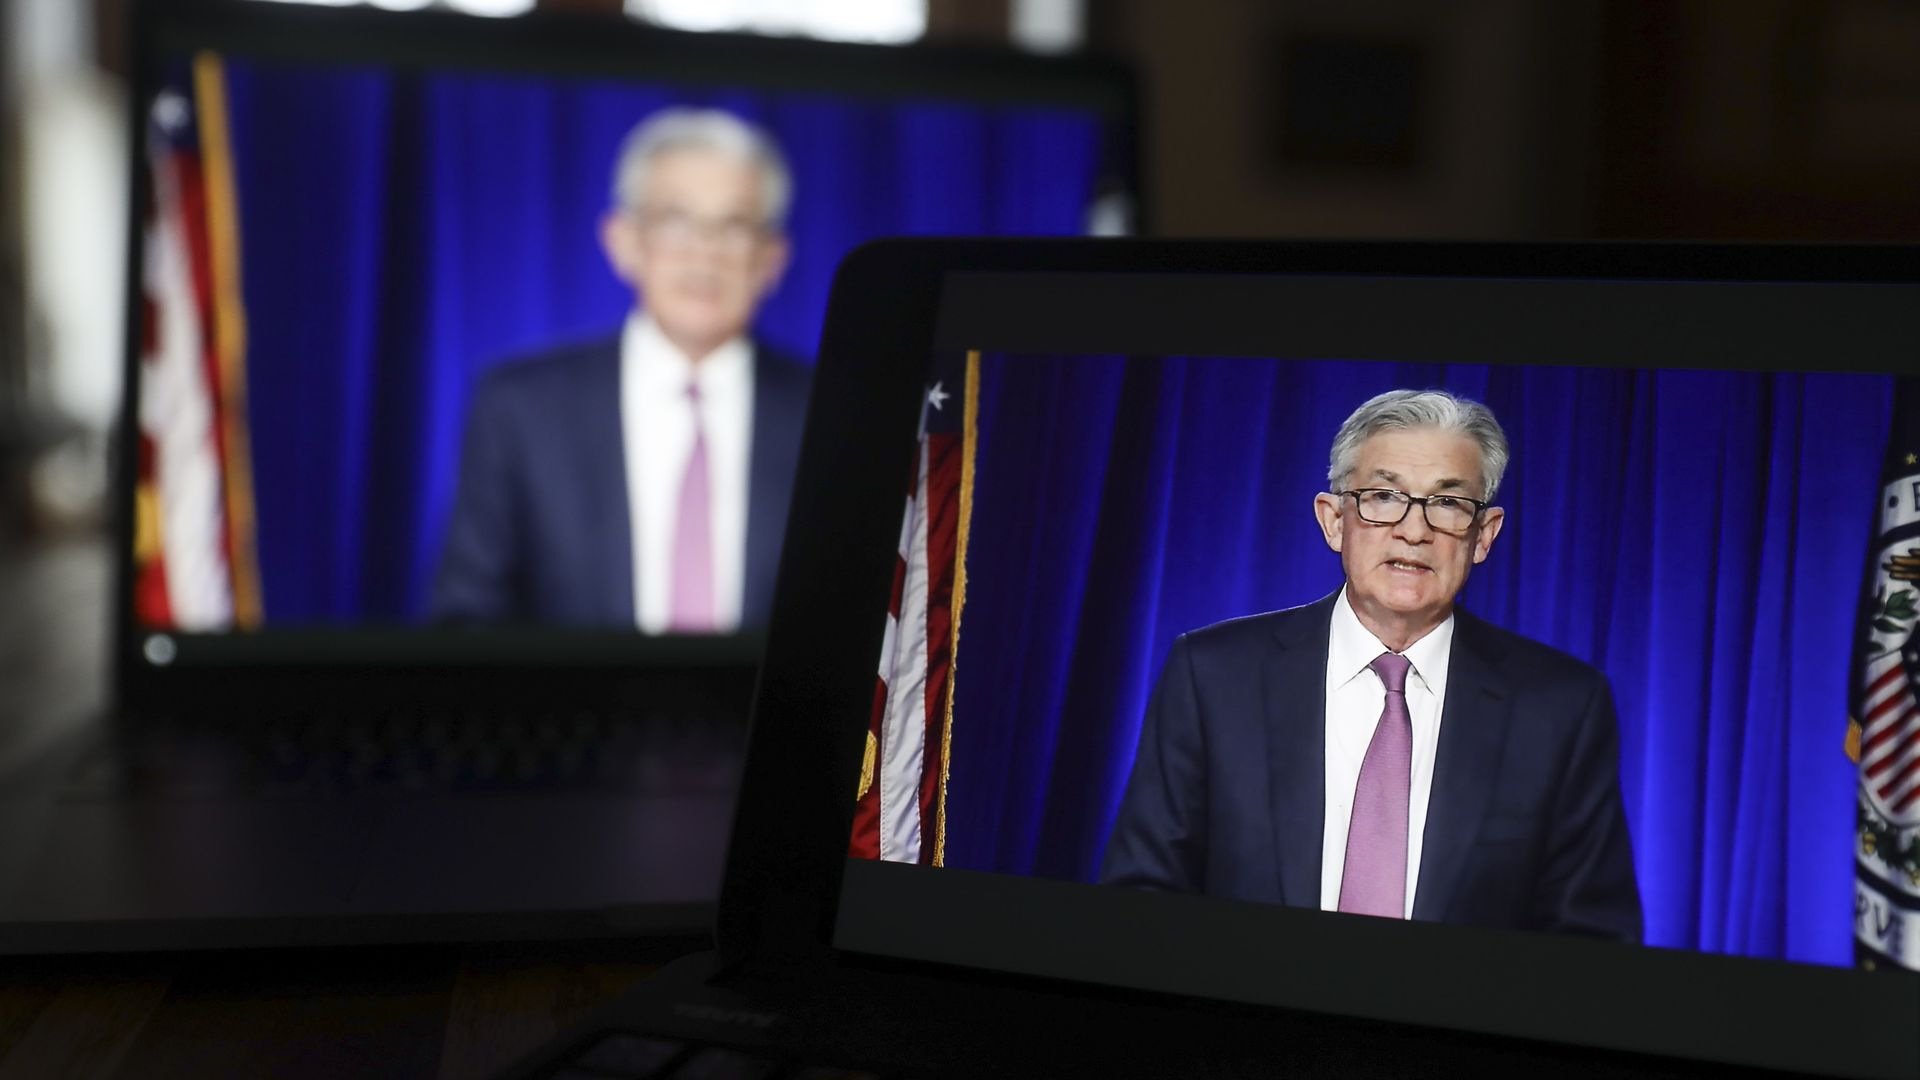 Jerome Powell, chairman of the U.S. Federal Reserve, speaks during a virtual news conference in Tiskilwa, Illinois, U.S.